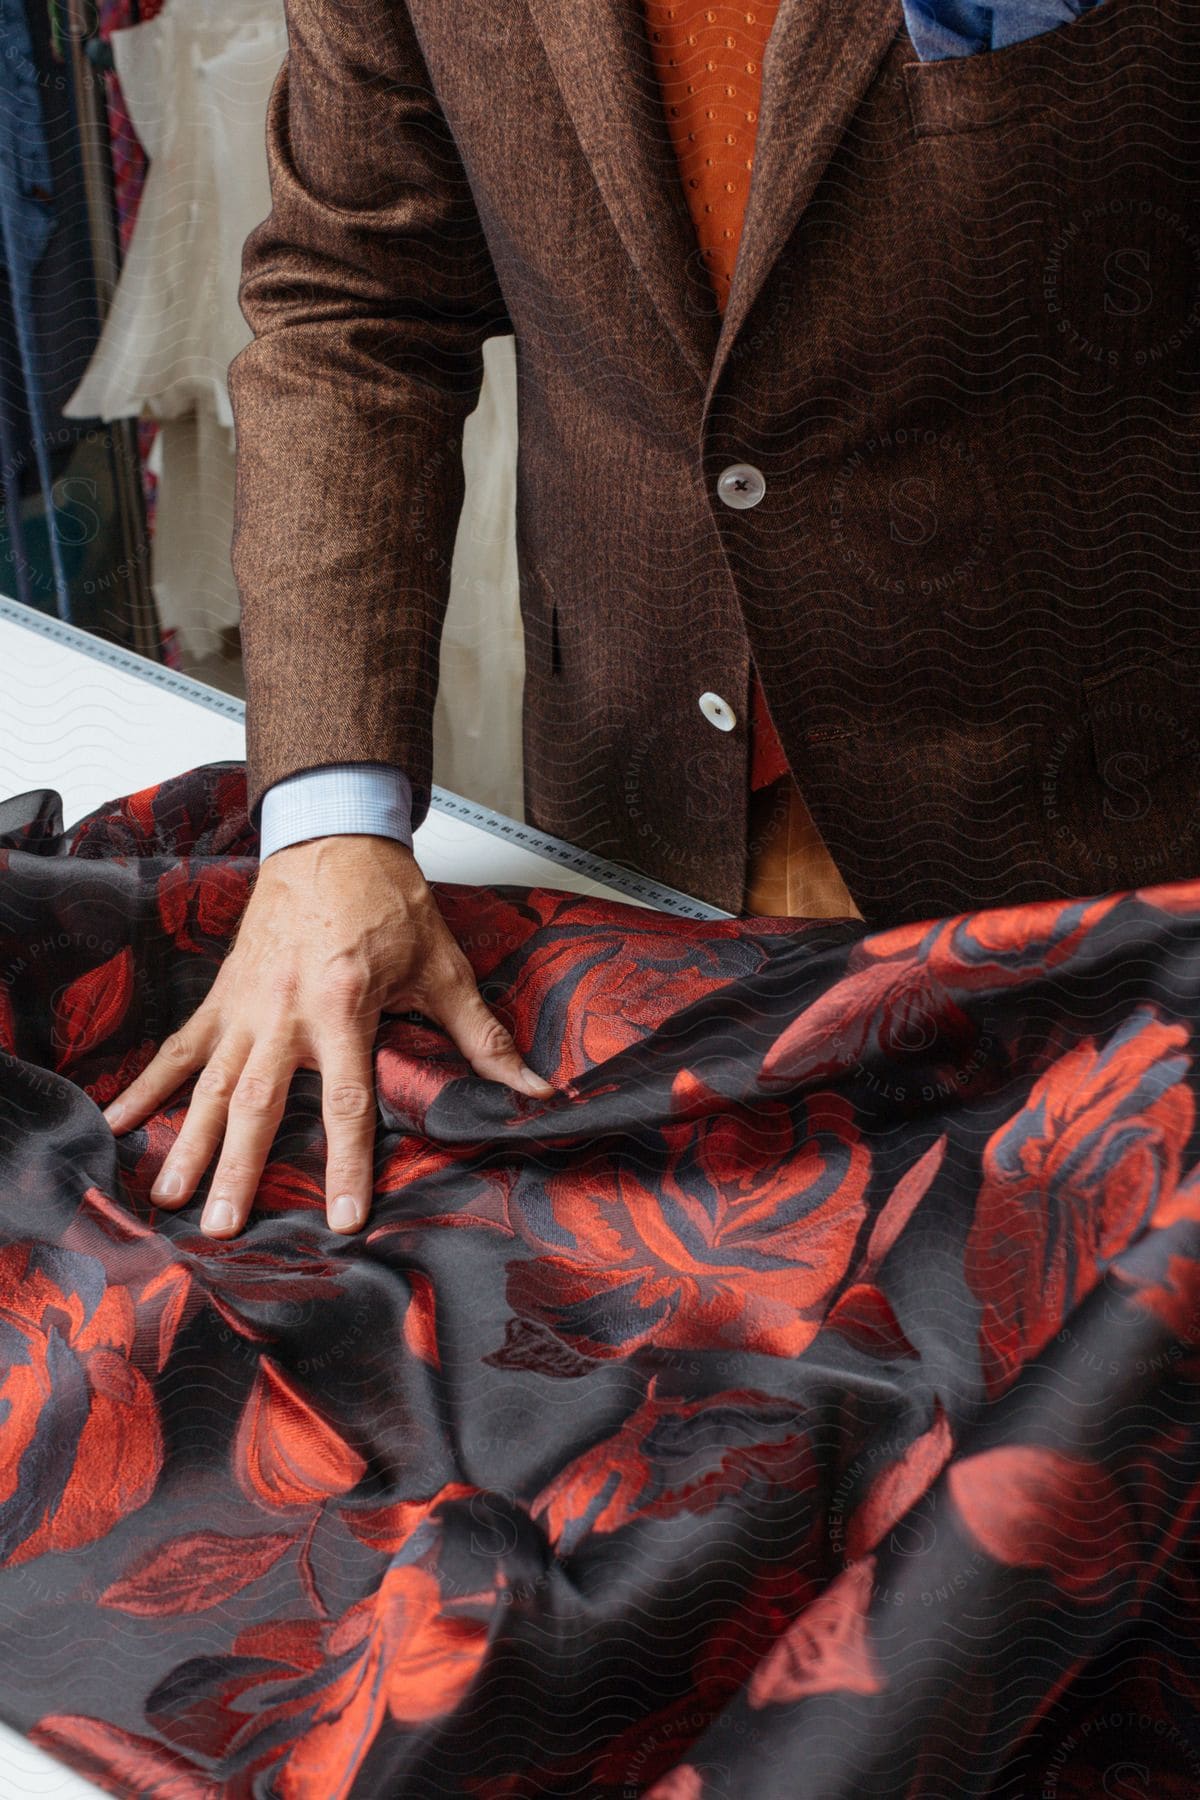 A man in a brown suit coat and orange tie examines a red and black floral print fabric